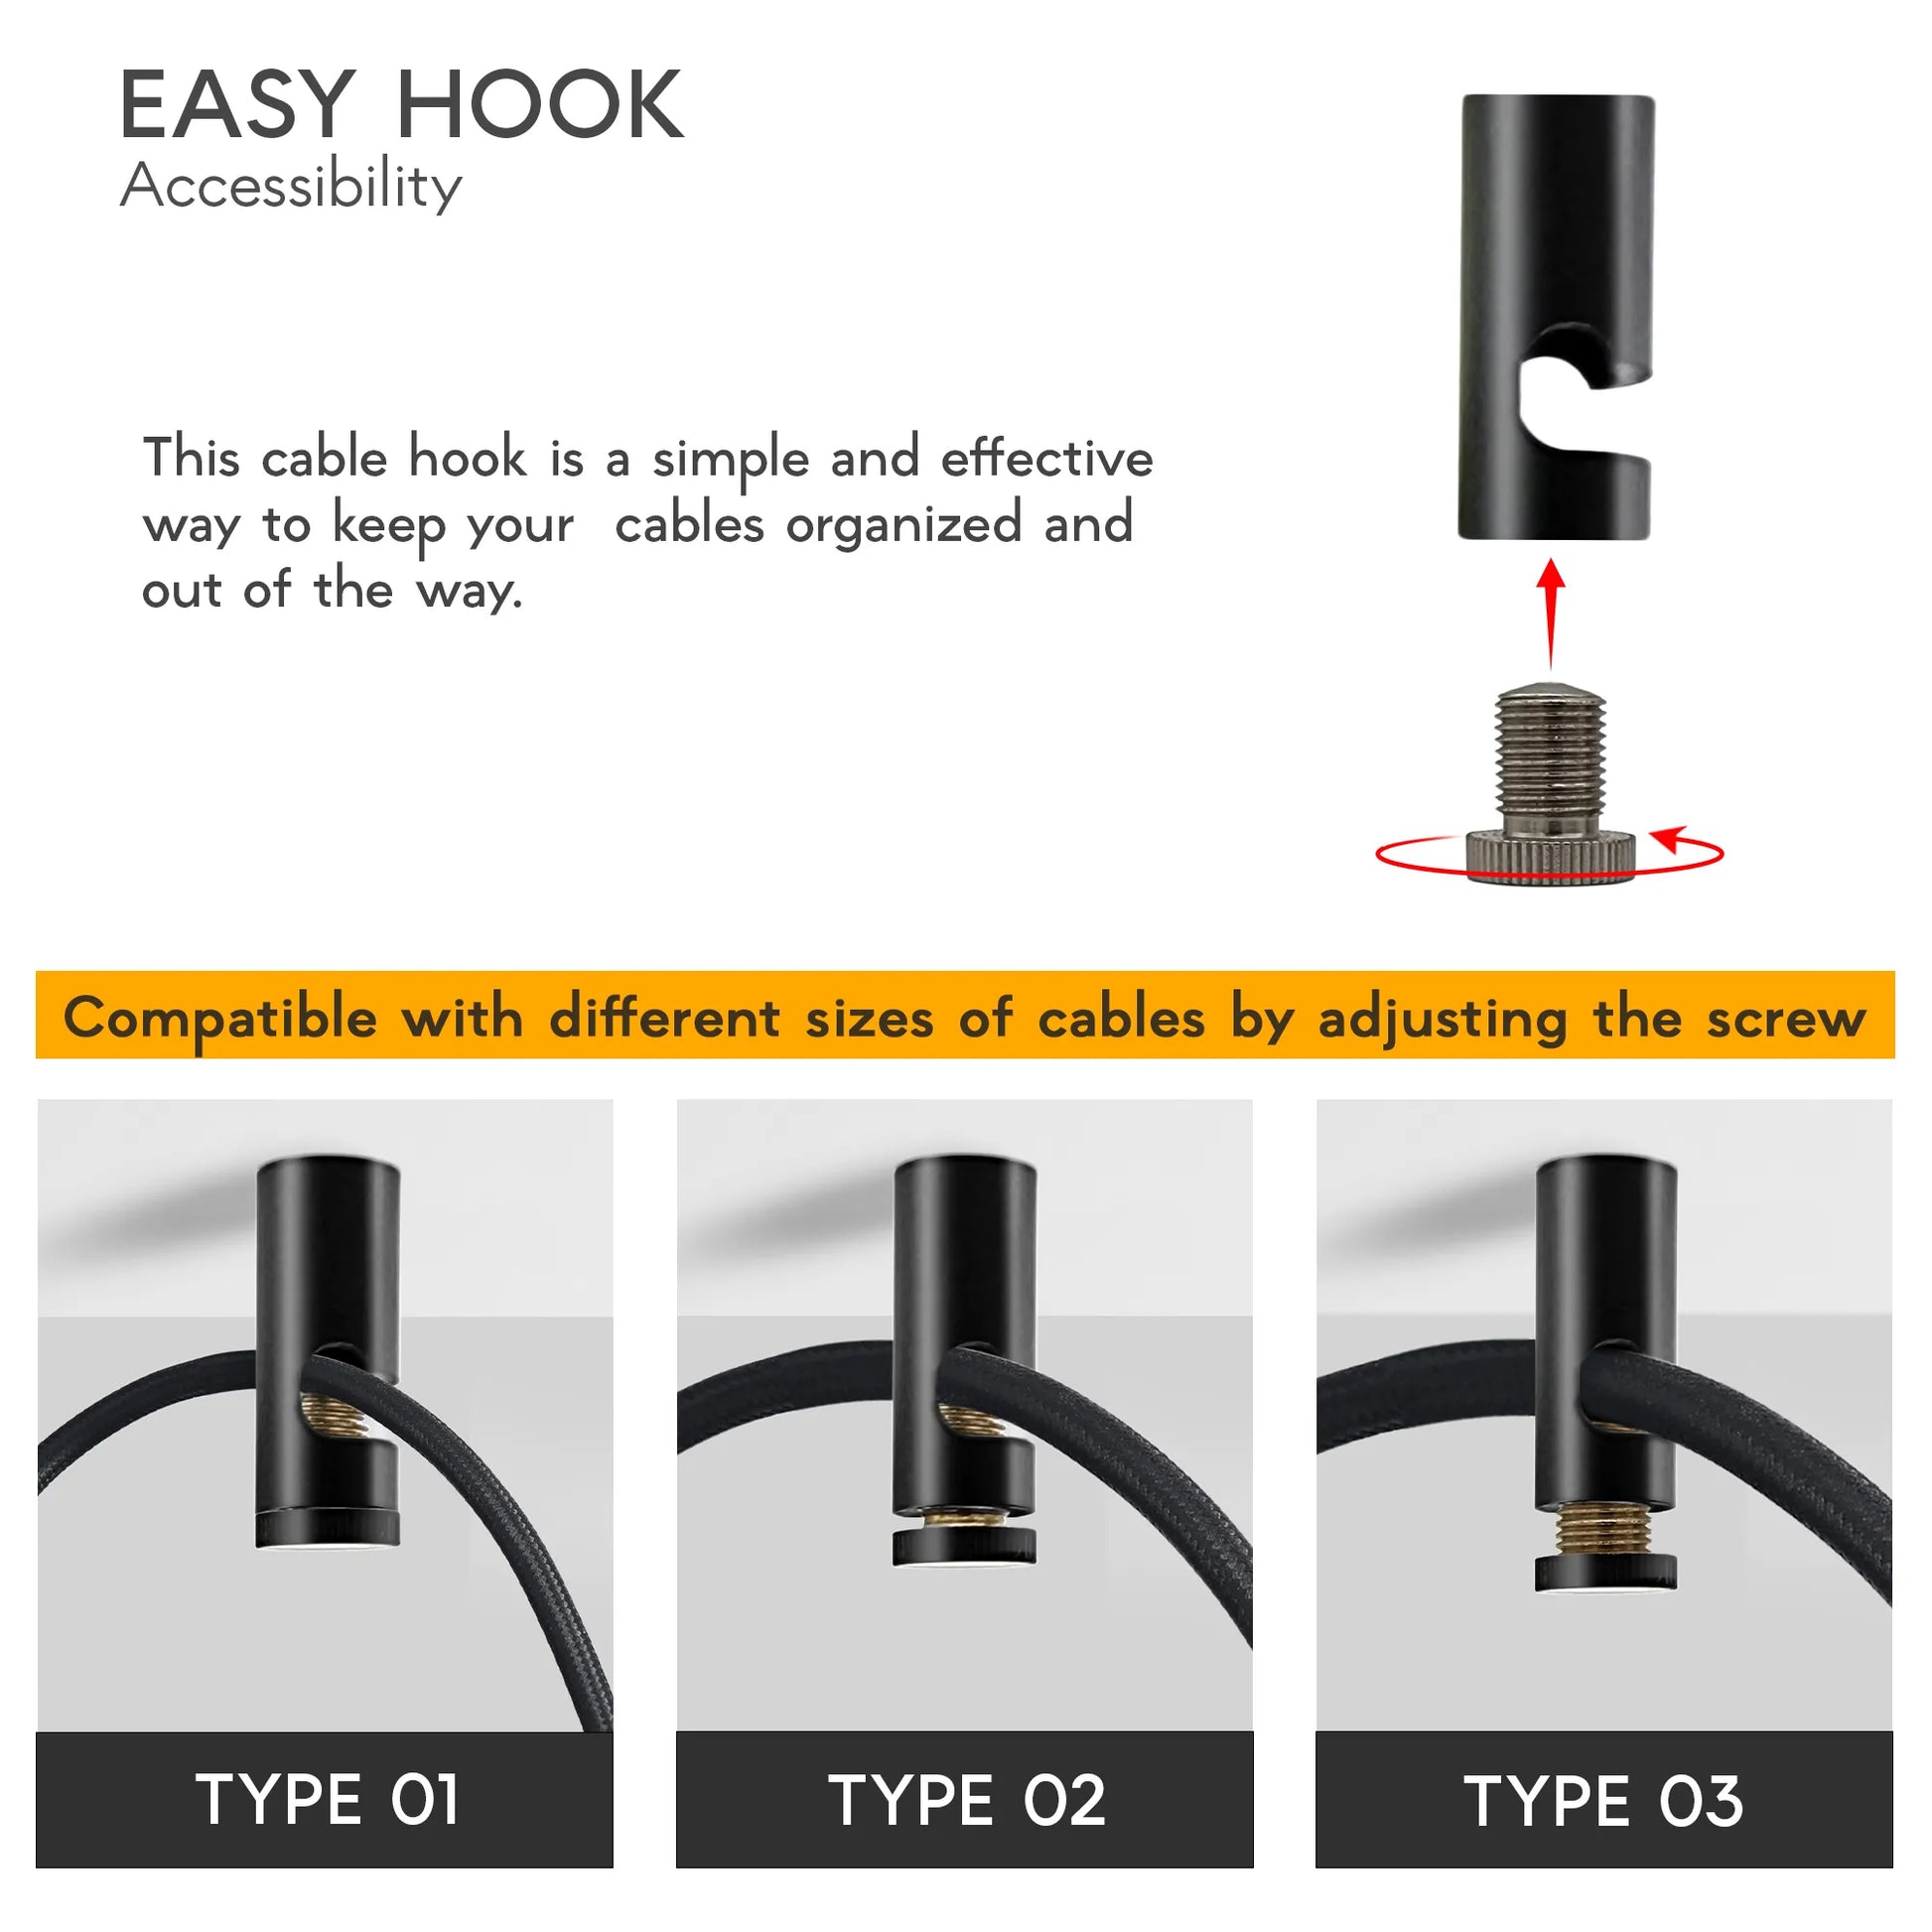 Cable Easy hook Accessibility